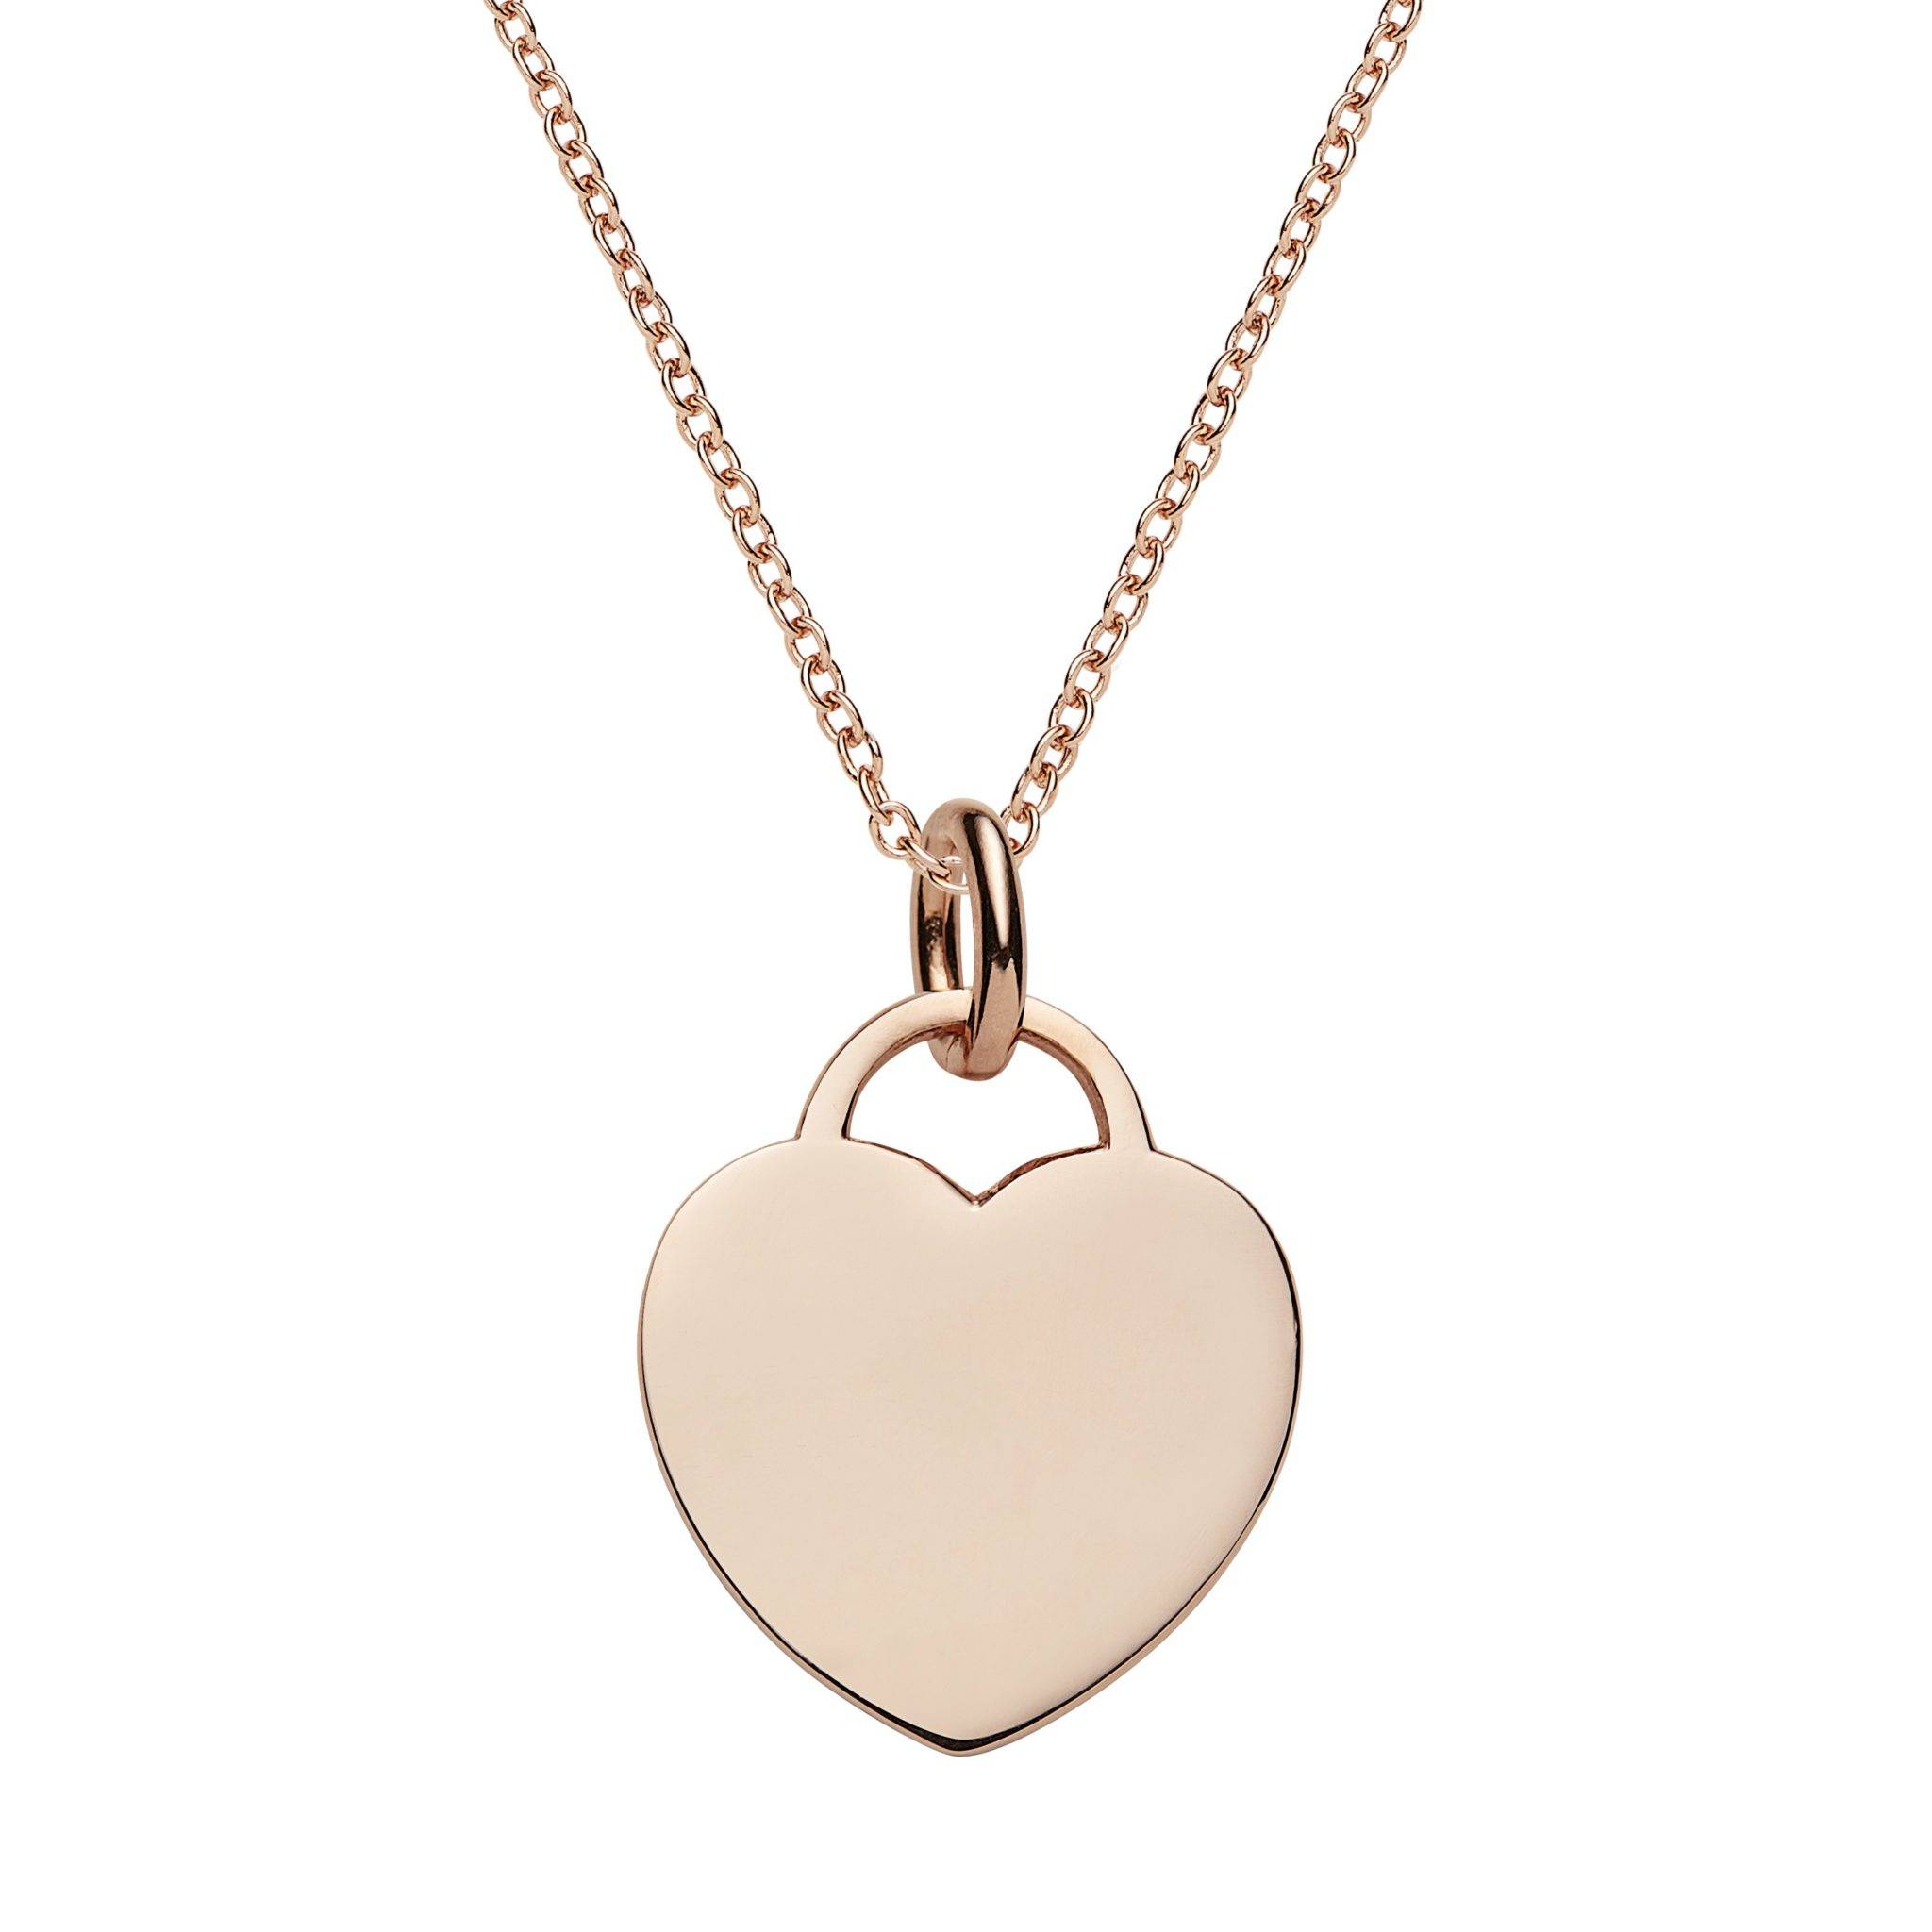 Personalised rose gold heart tag necklace